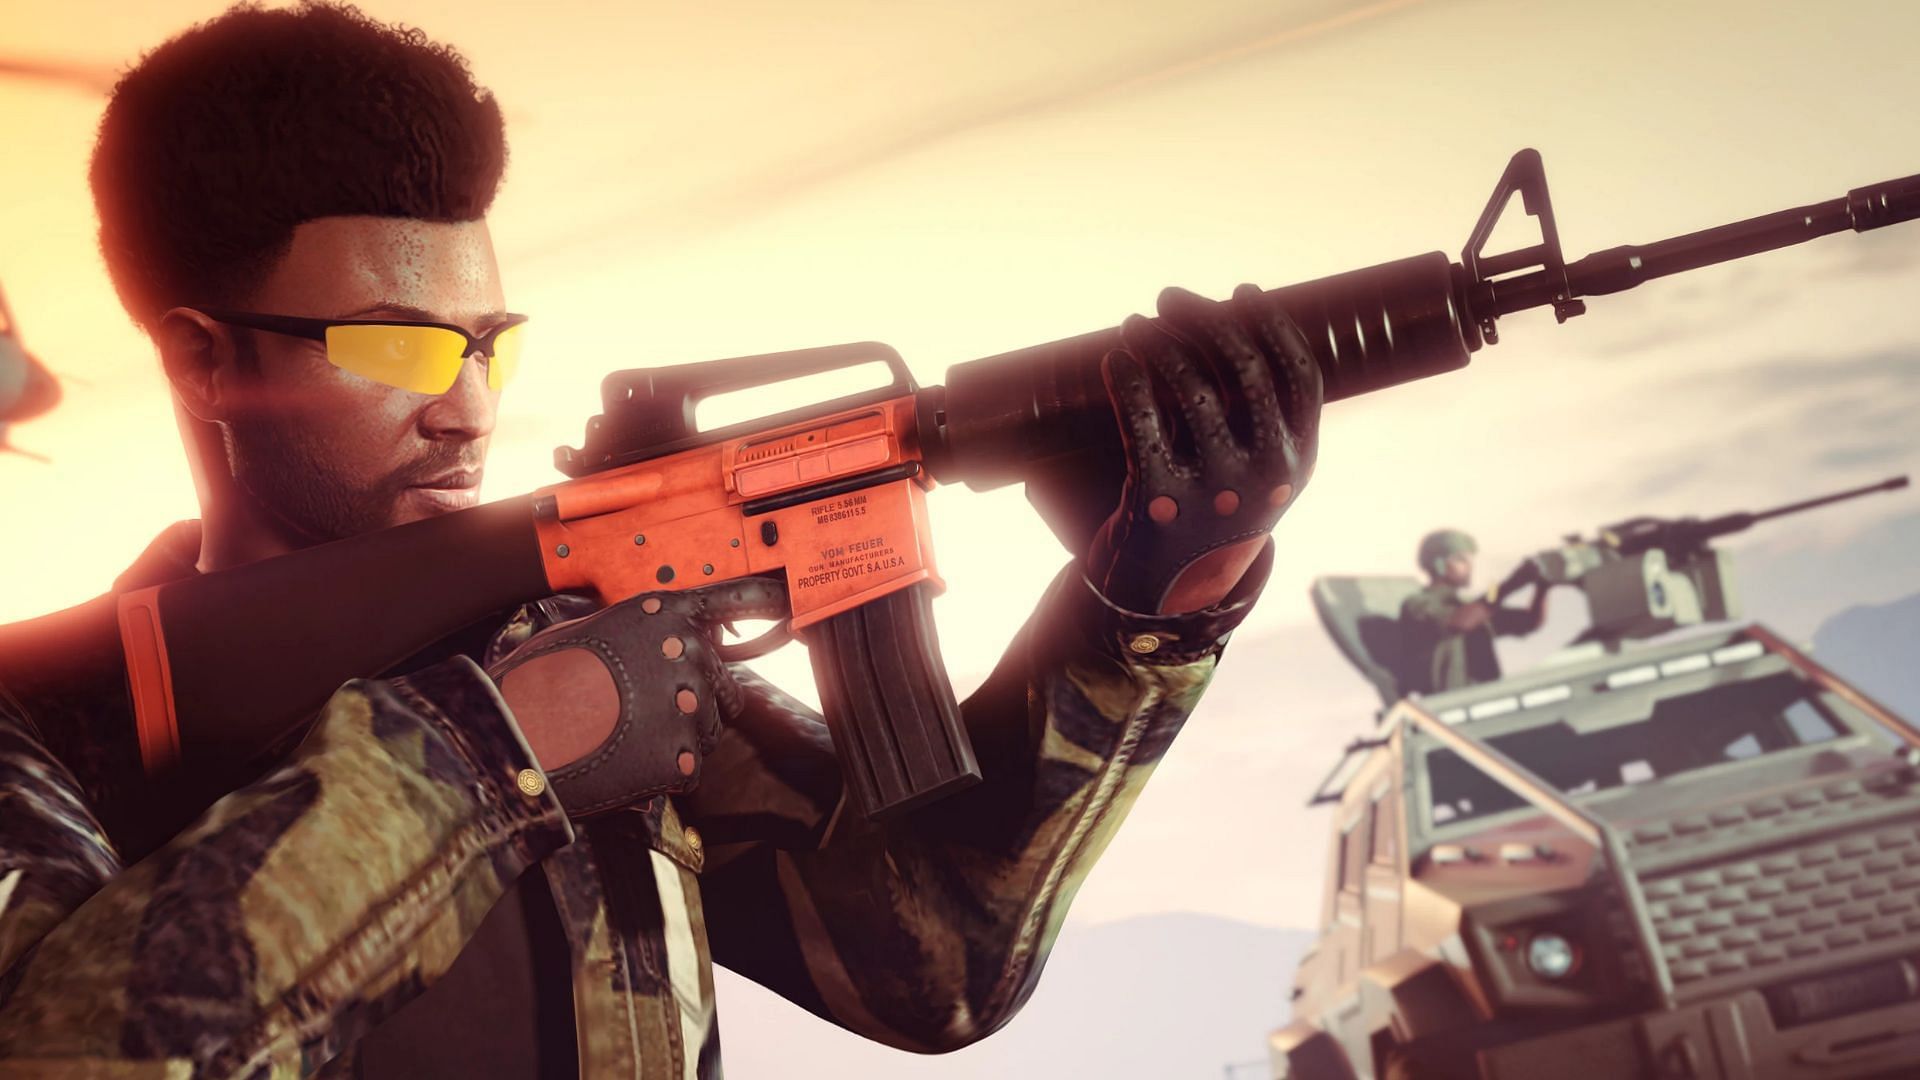 A promotional image featuring the new weapon (Image via Rockstar Games)